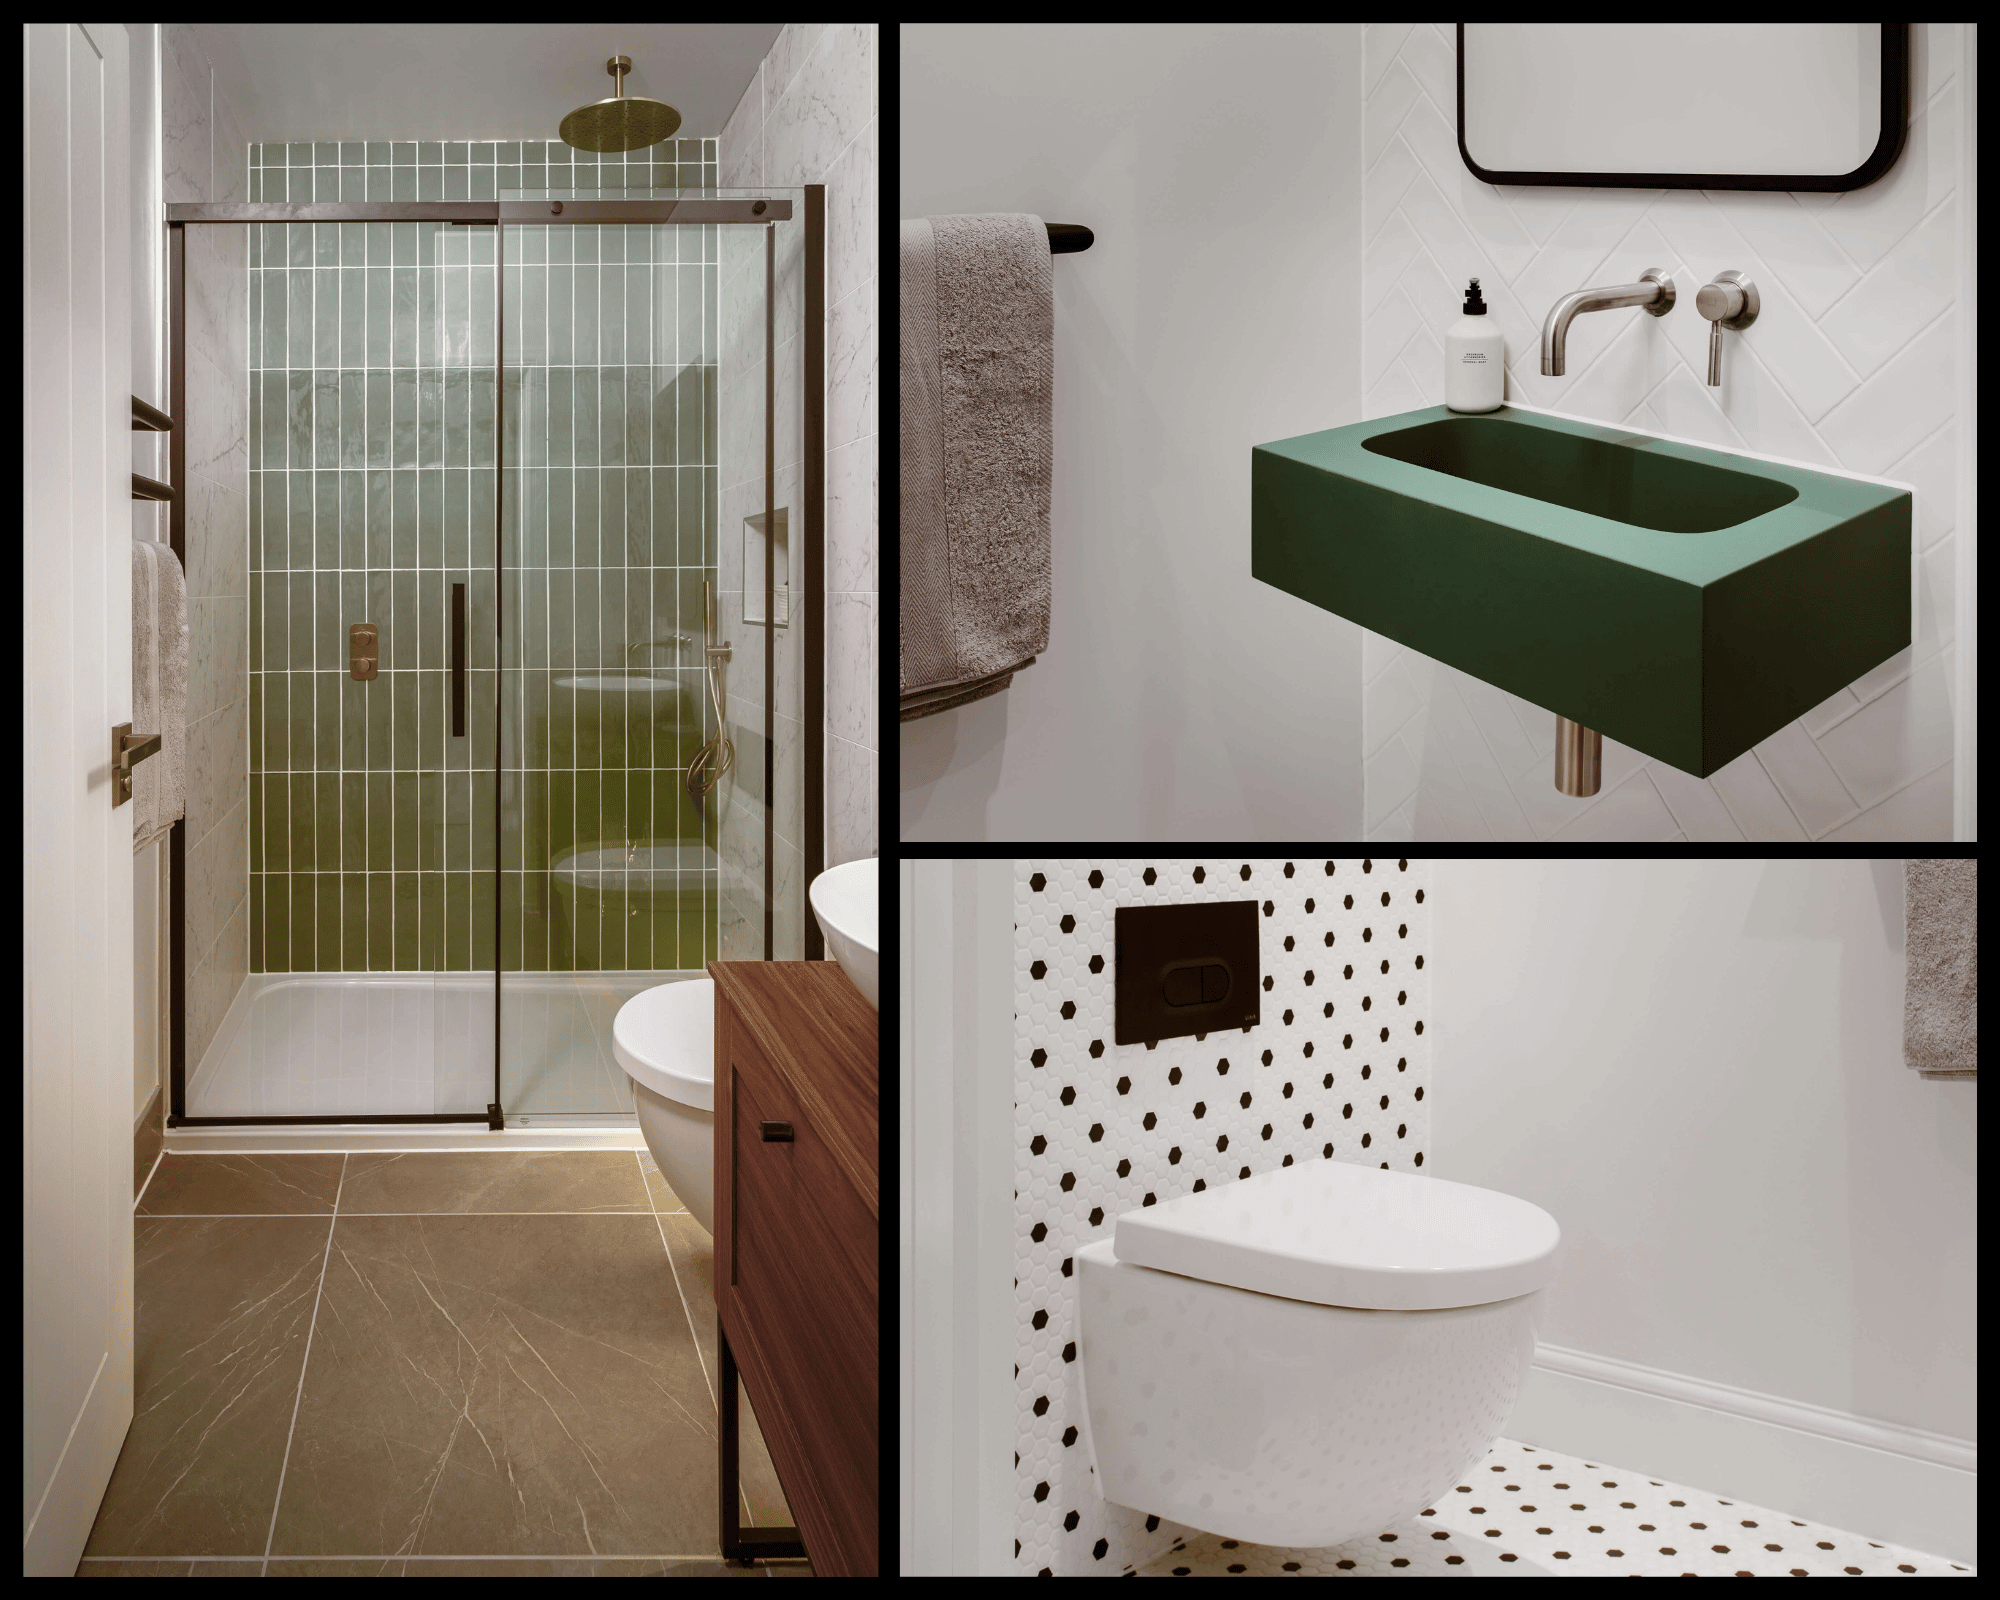 Collage of sanitary ware in residential home designed by Jigsaw, specified by Big Bath Company